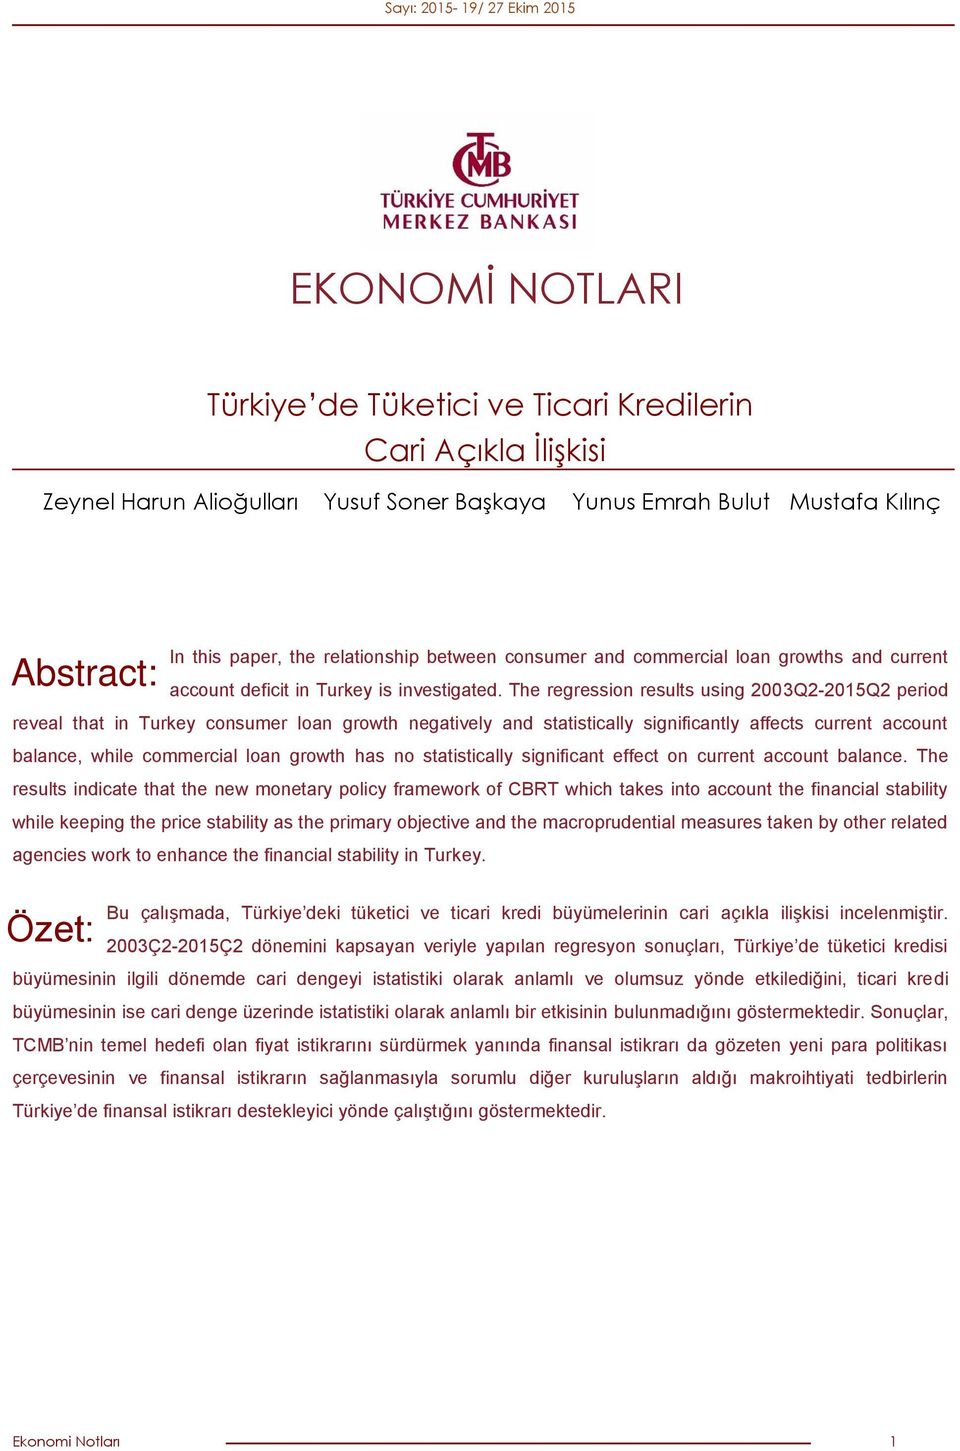 The regression results using 3Q-15Q period reveal that in Turkey consumer loan growth negatively and statistically significantly affects current account balance, while commercial loan growth has no